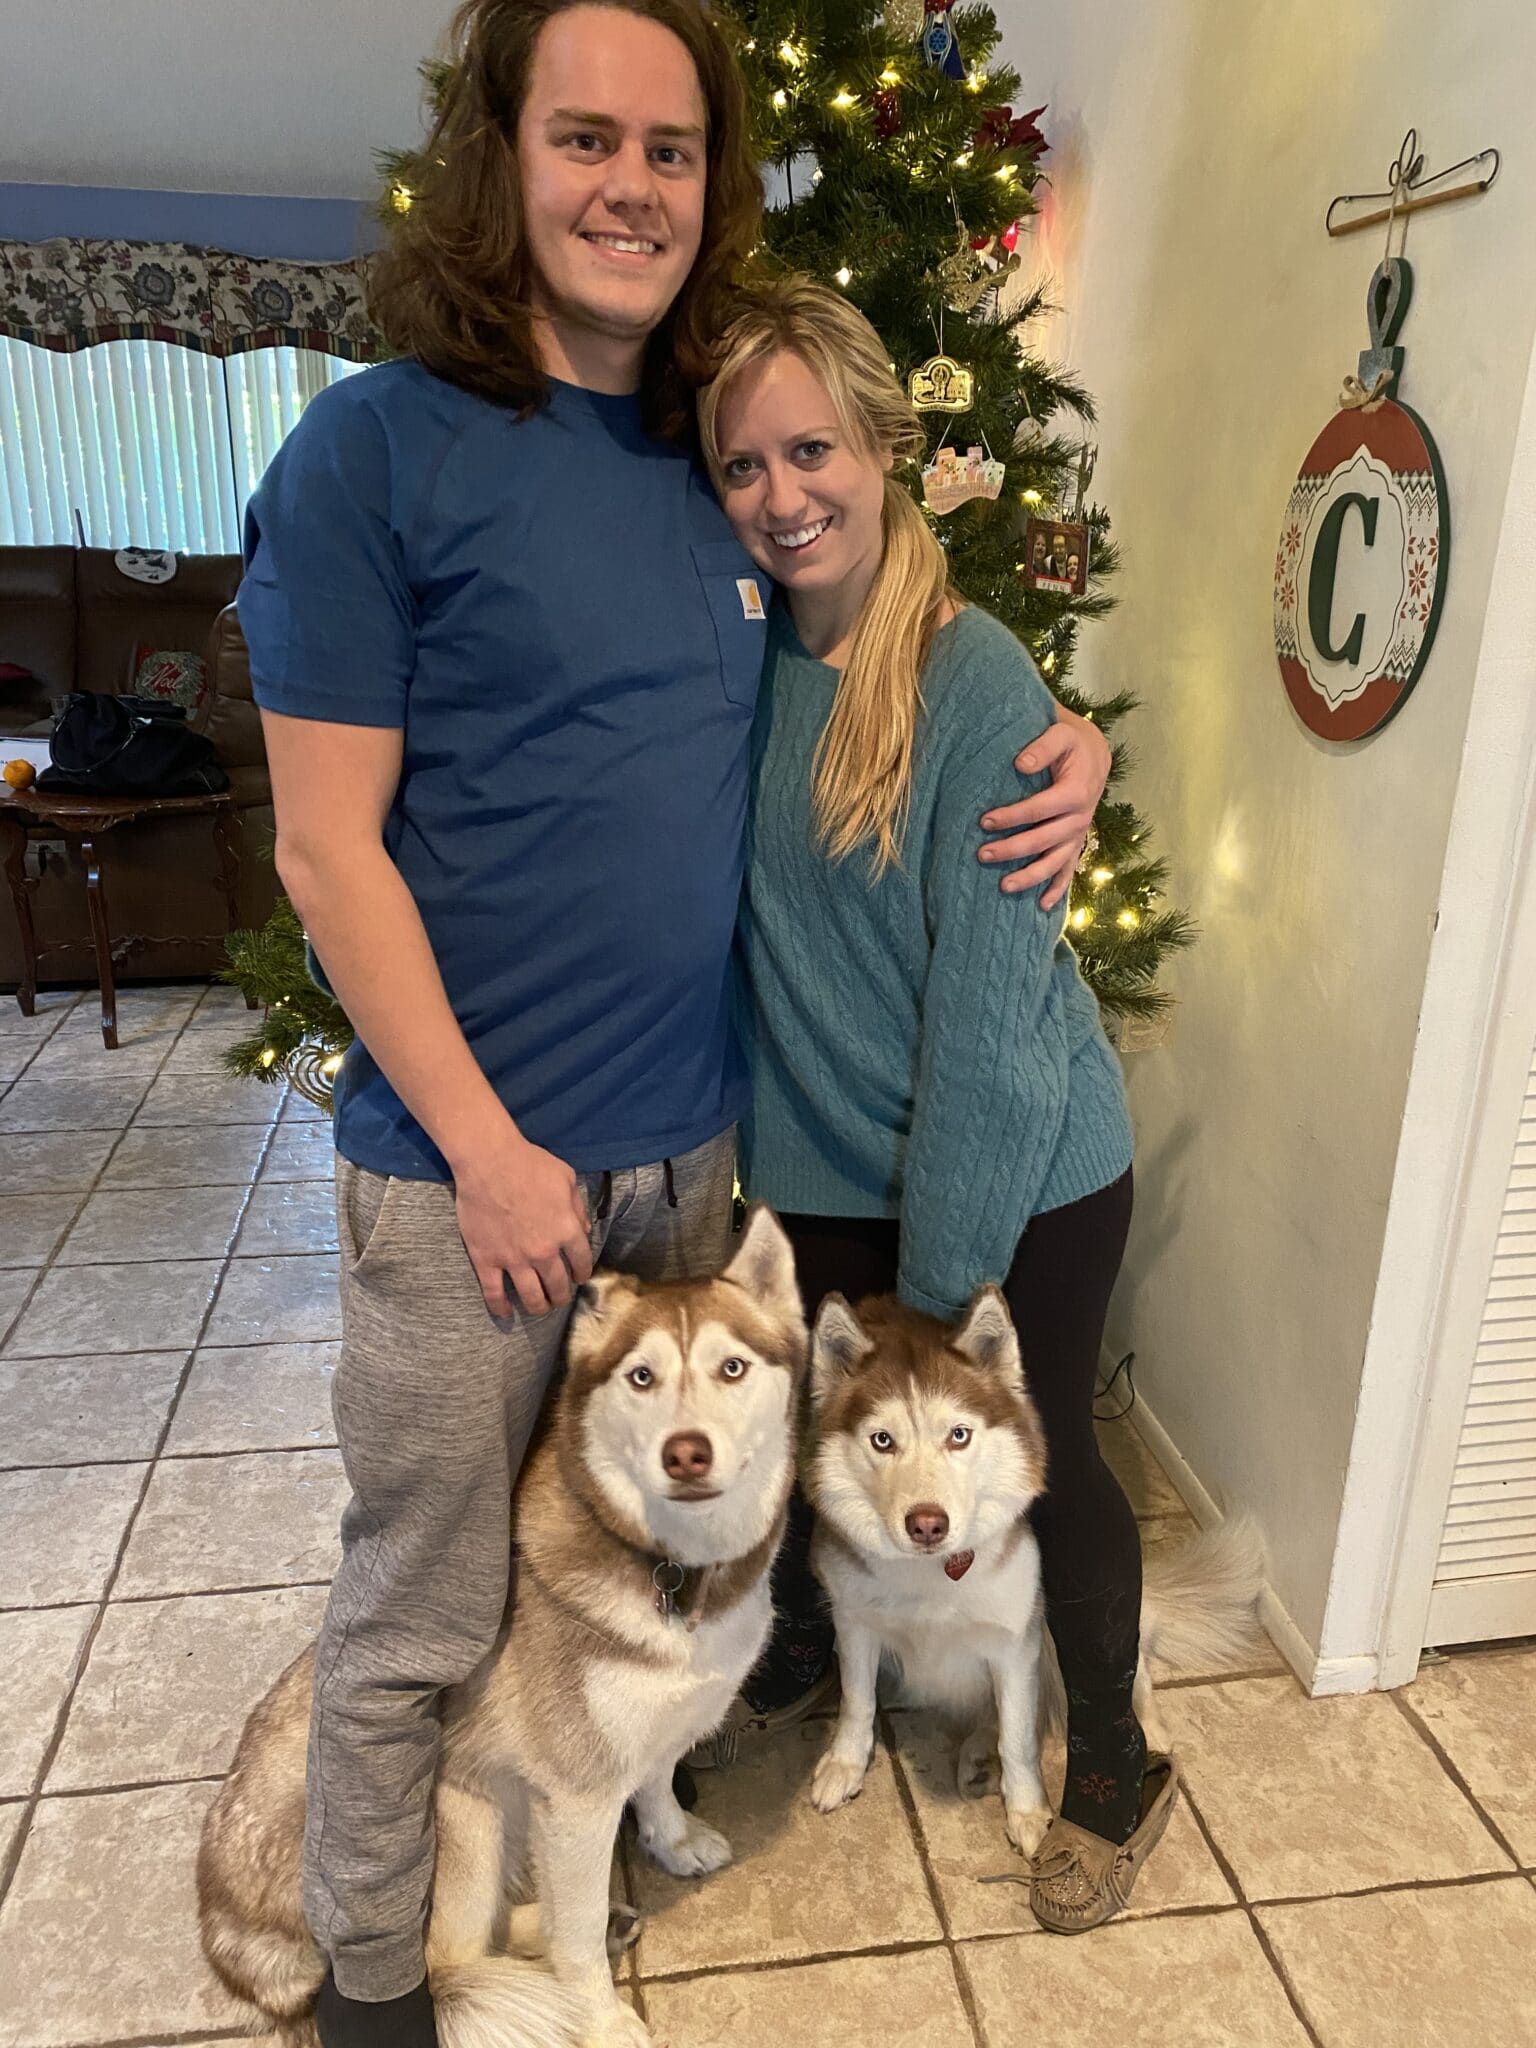 newly engaged couple standing with their two brown and white dogs between their legs